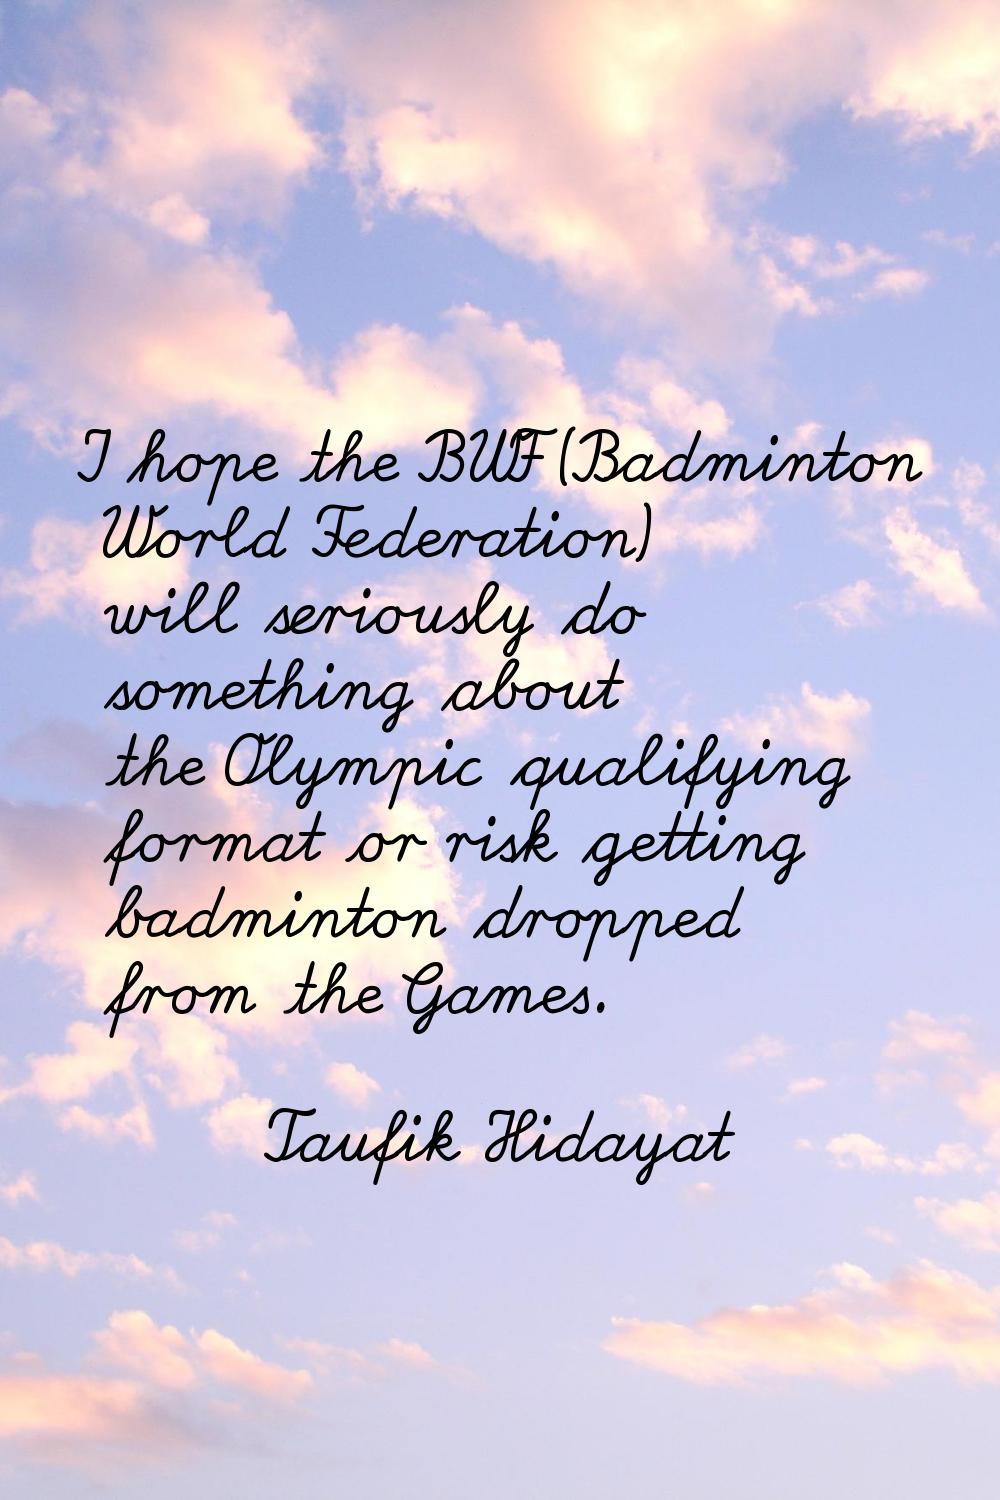 I hope the BWF (Badminton World Federation) will seriously do something about the Olympic qualifyin